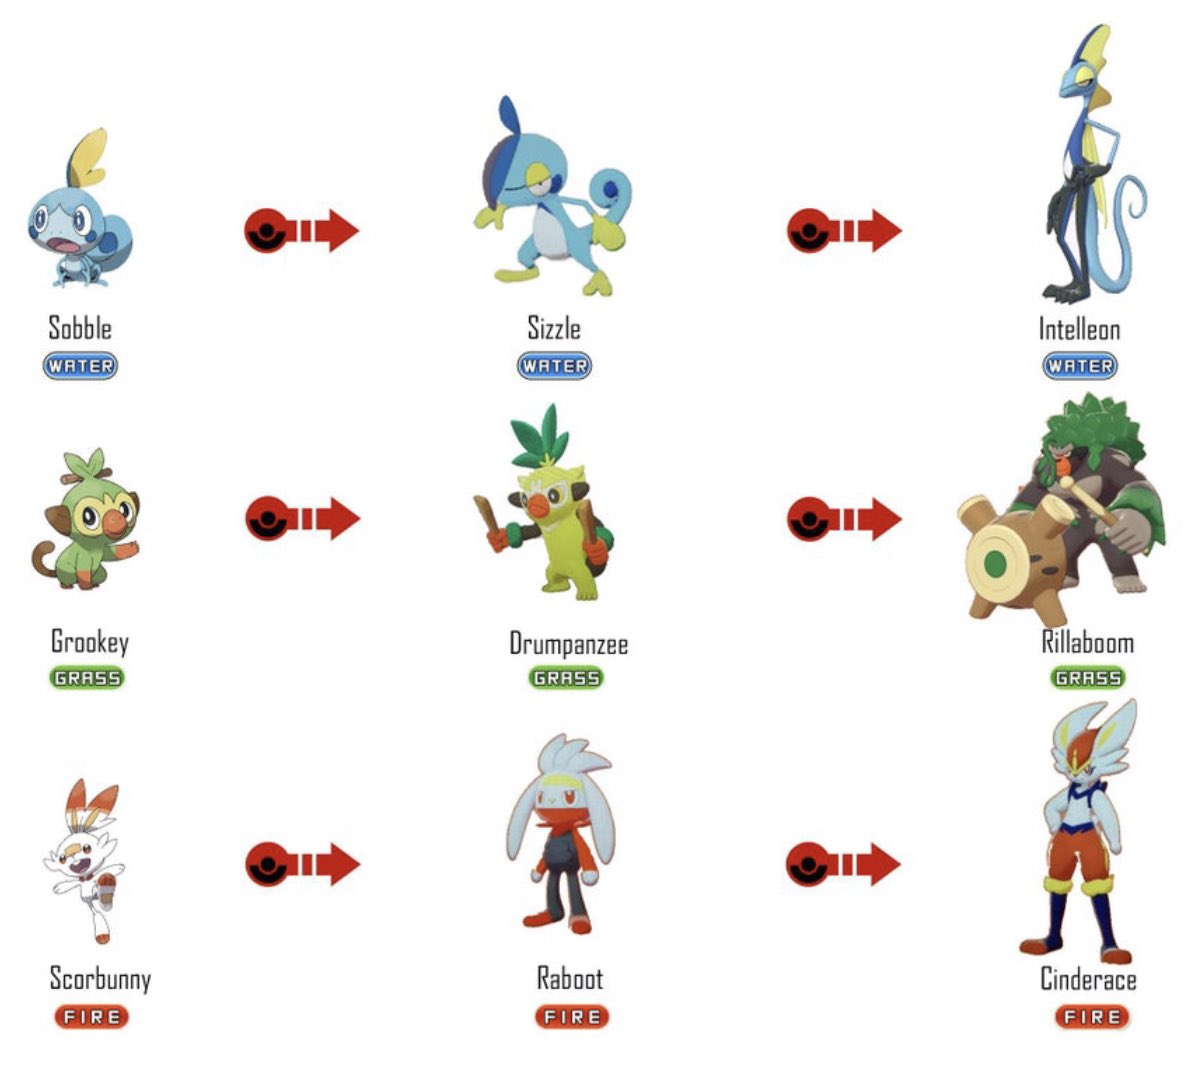 Pokemon Sword and Shield Starters Evolution Guide - Which Starter